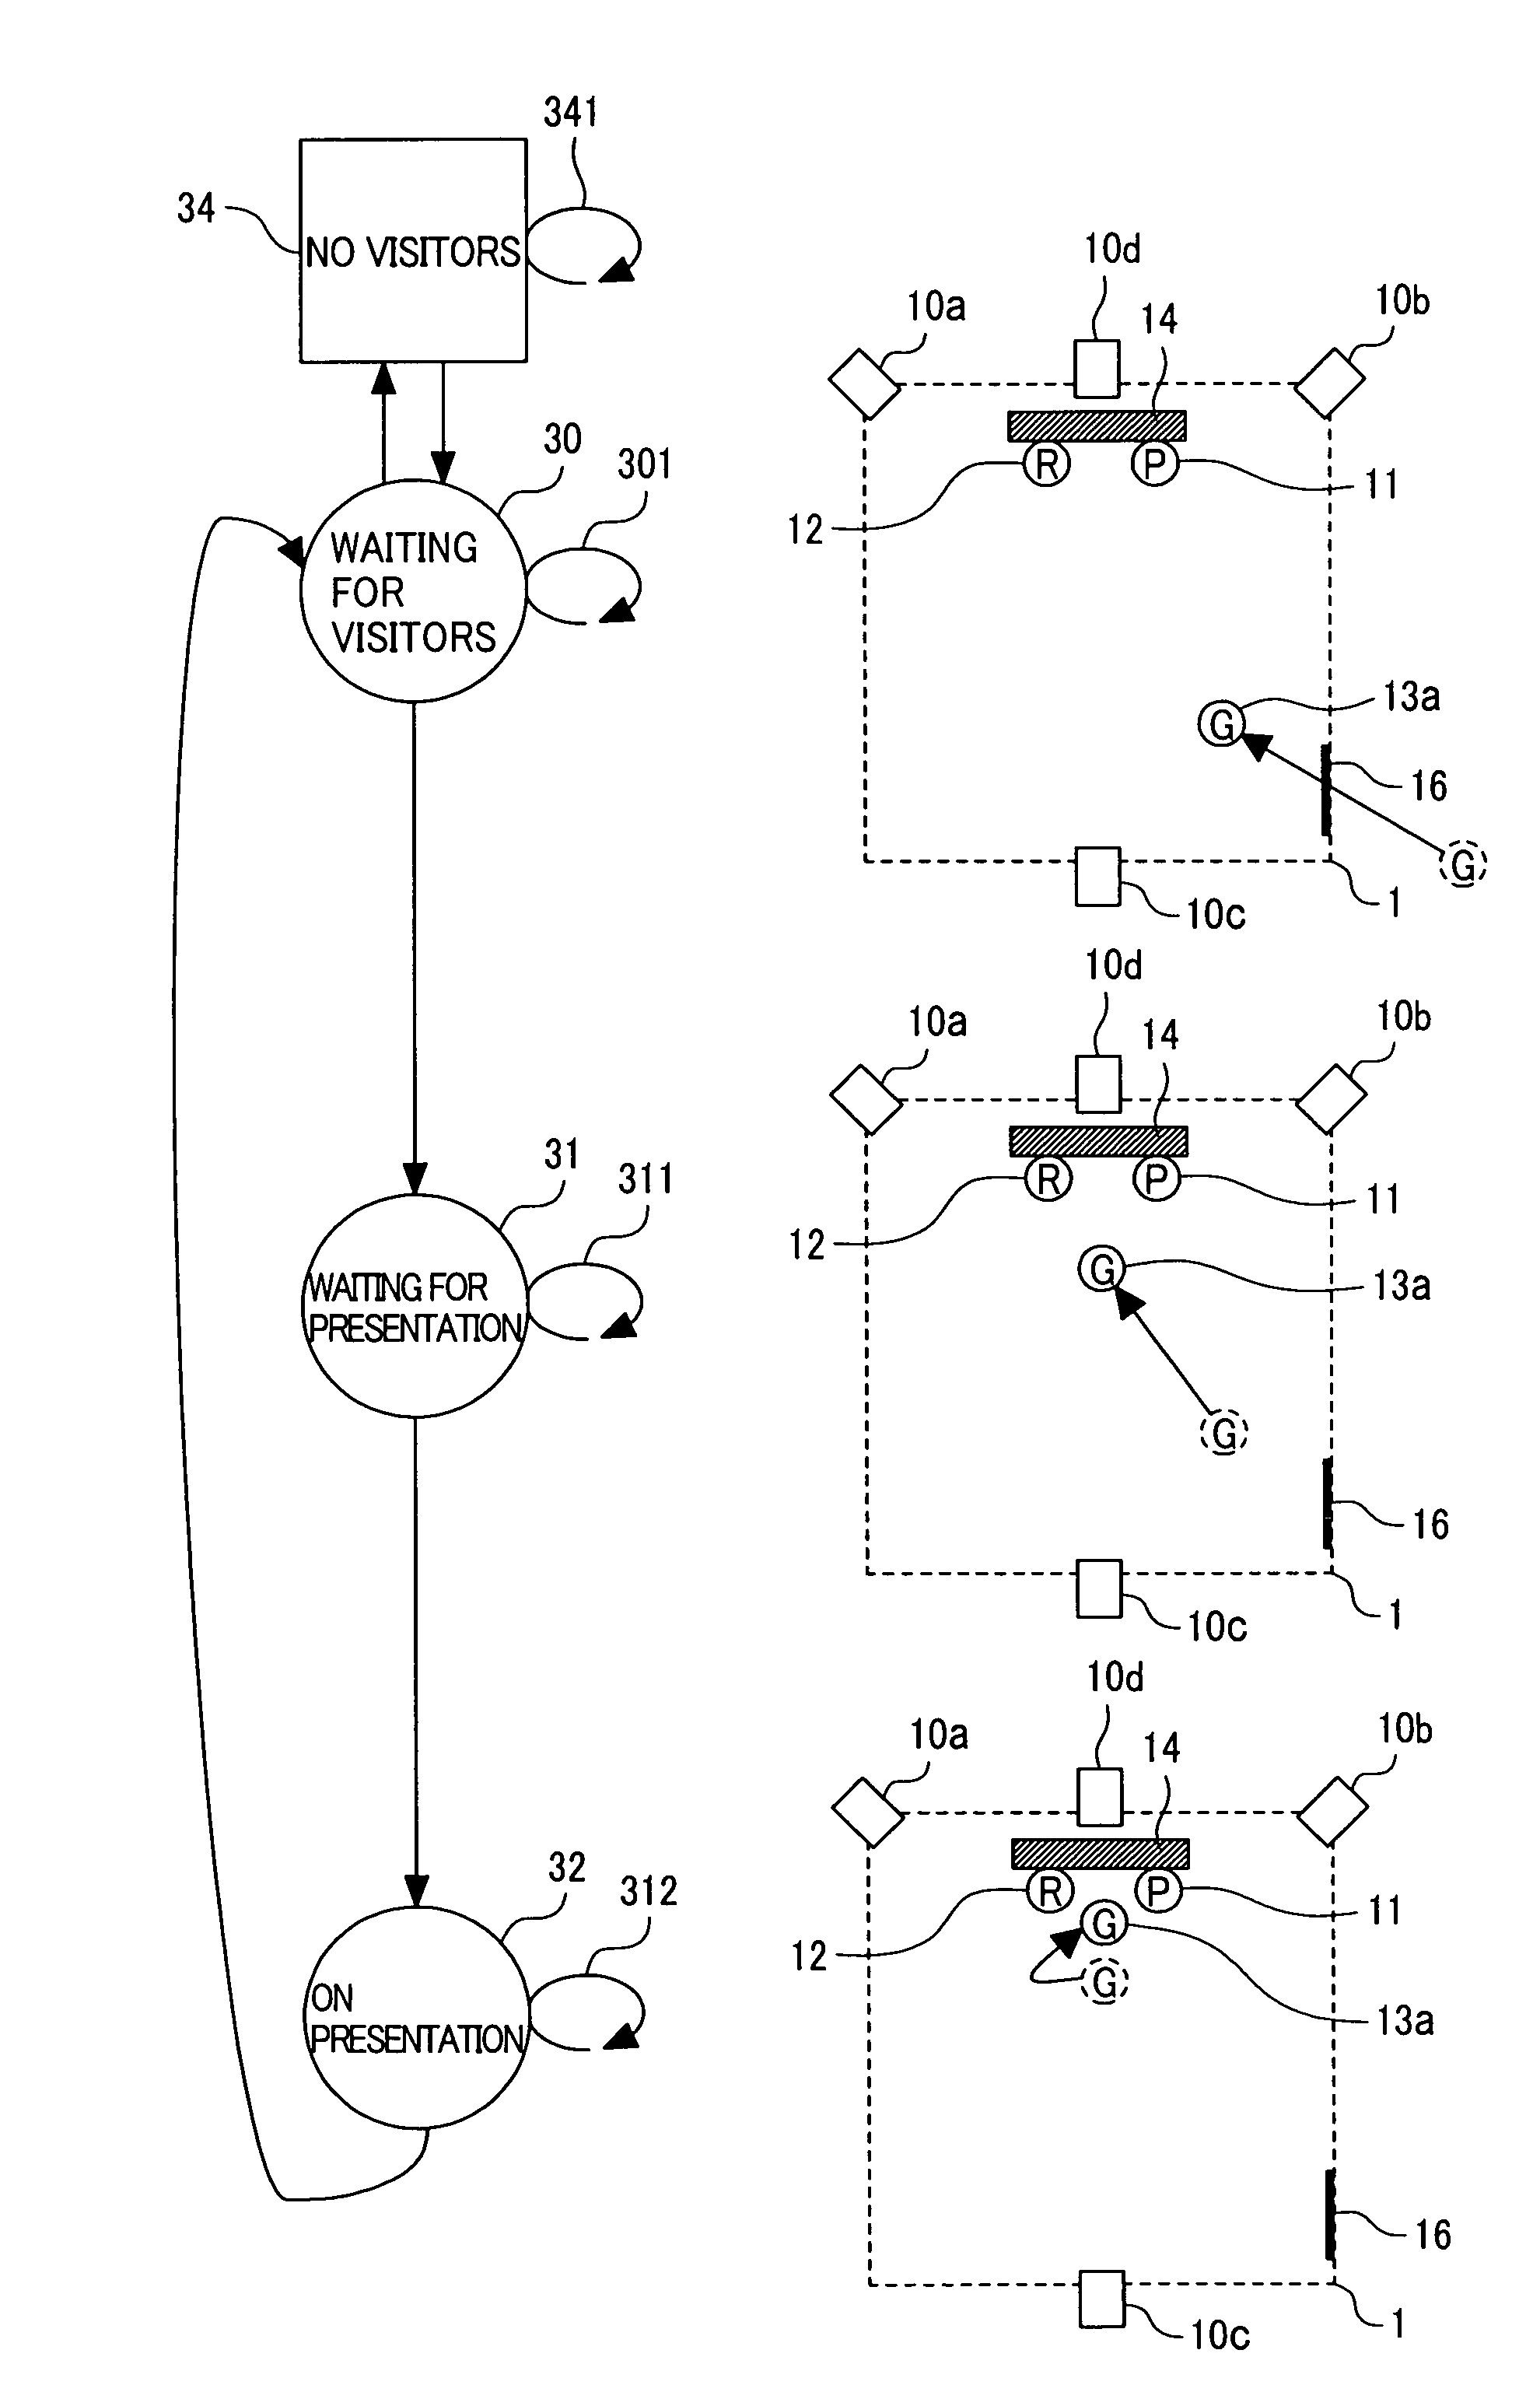 Multi-sensing devices cooperative recognition system